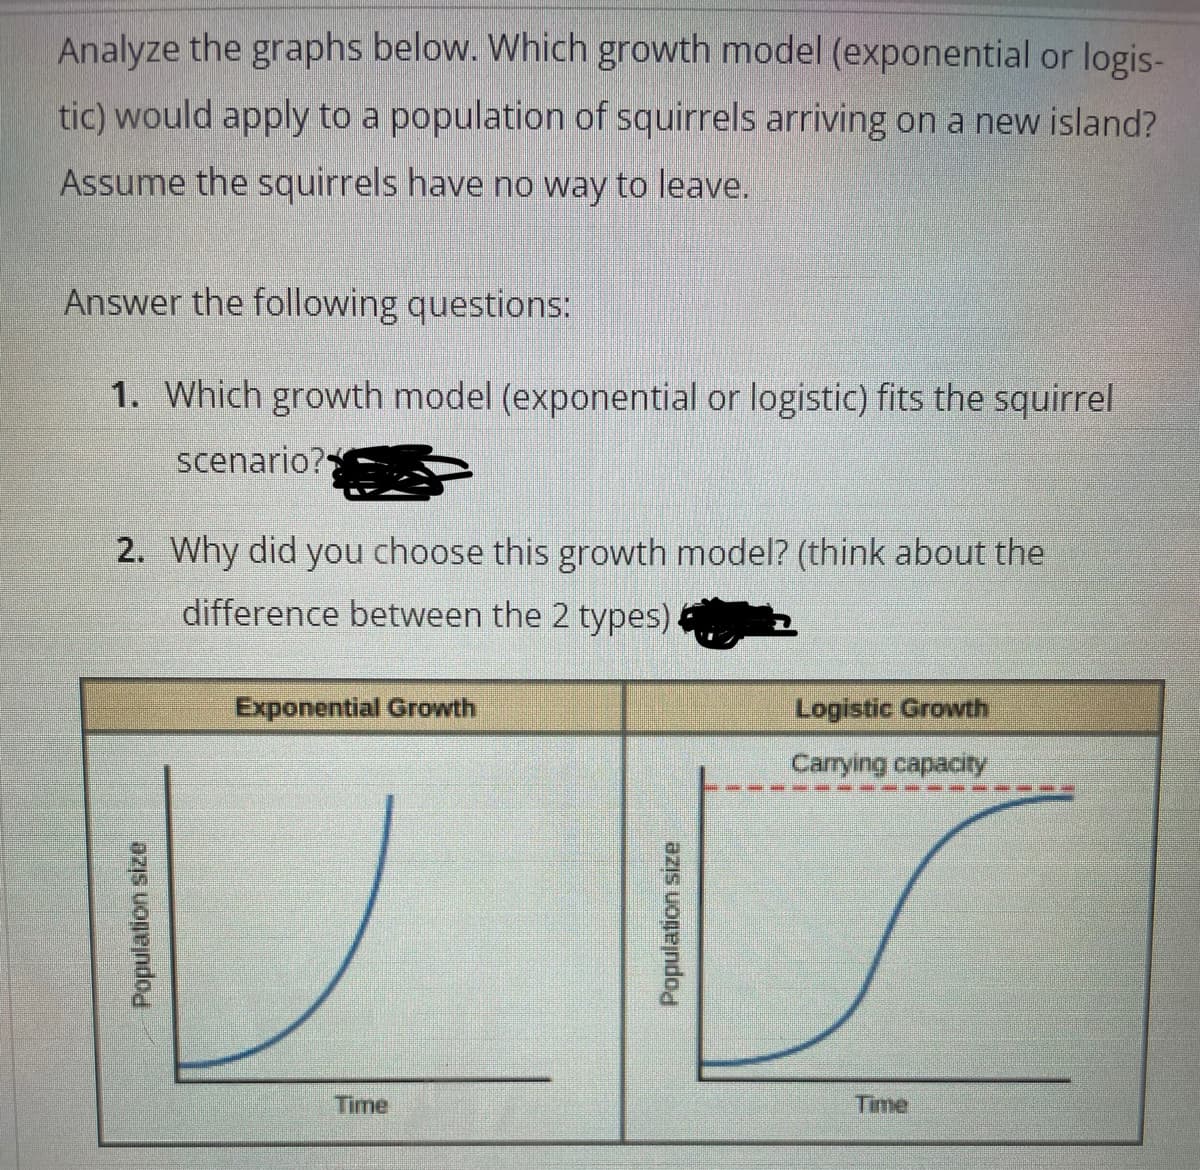 Analyze the graphs below. Which growth model (exponential or logis-
tic) would apply to a population of squirrels arriving on a new island?
Assume the squirrels have no way to leave.
Answer the following questions:
1. Which growth model (exponential or logistic) fits the squirrel
scenario?
2. Why did you choose this growth model? (think about the
difference between the 2 types)
Exponential Growth
Logistic Growth
Carrying capacity
Time
Time
